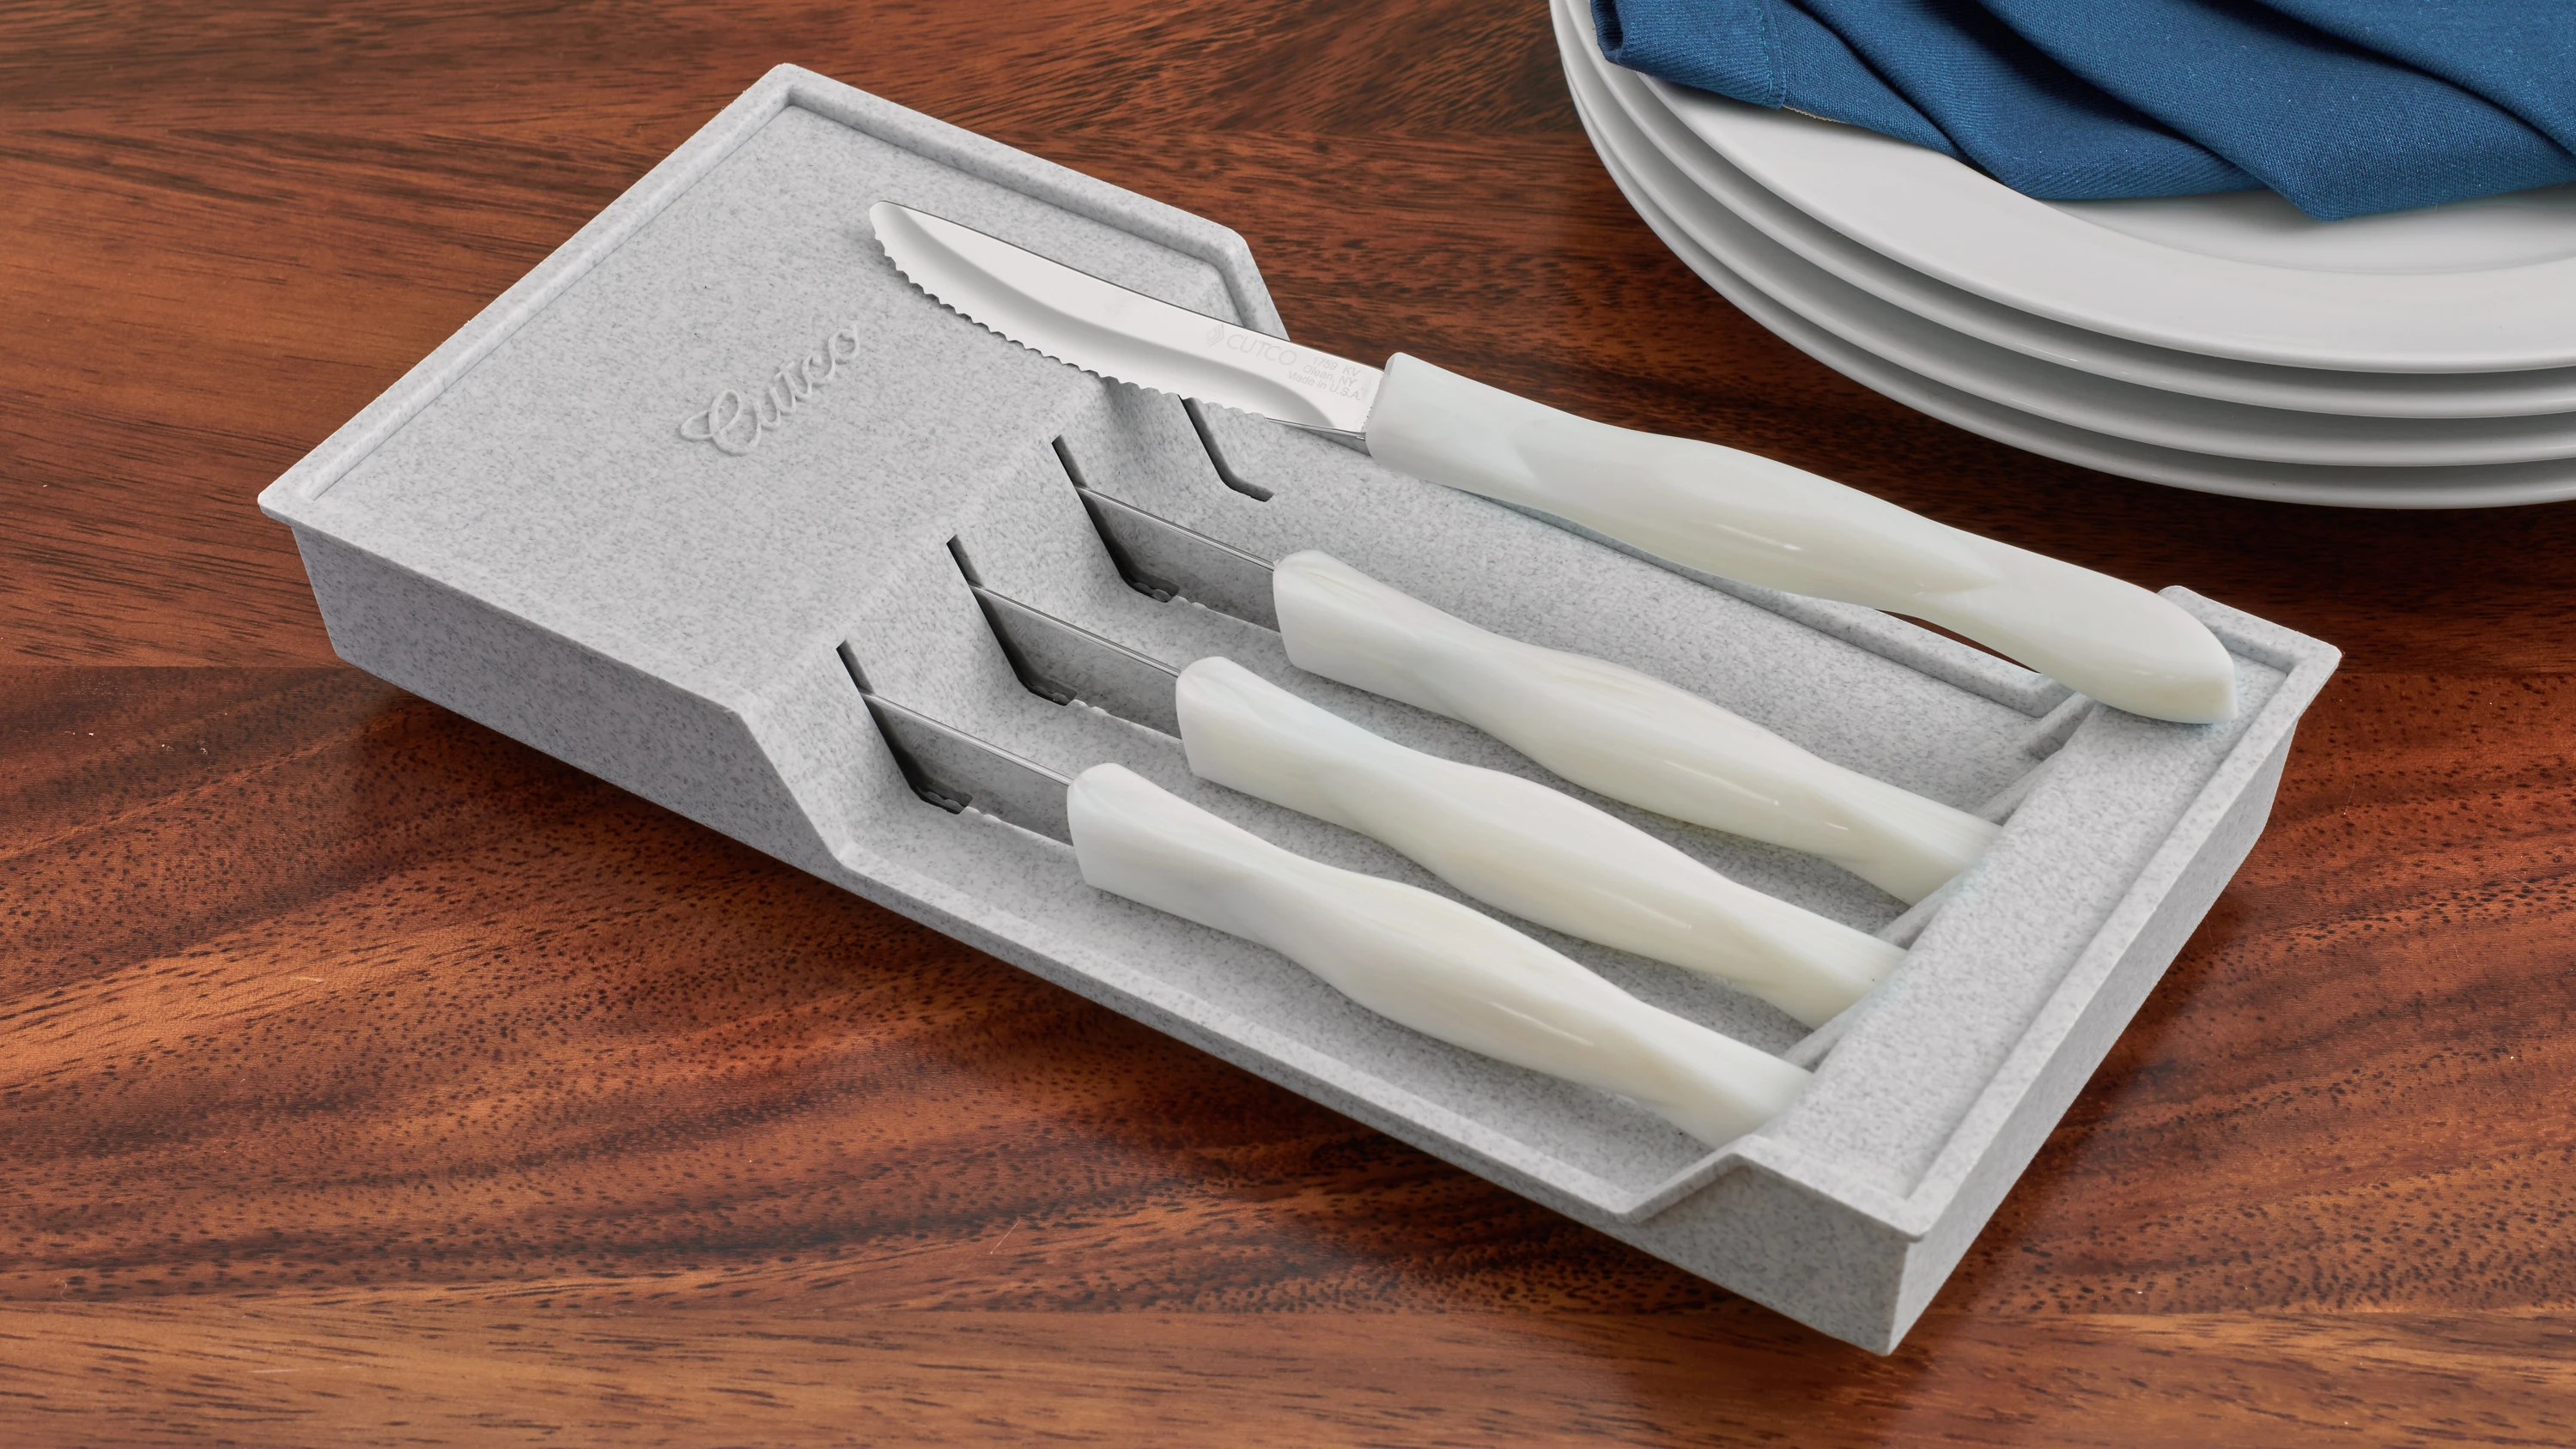 4-Pc. Table Knife Set with Tray